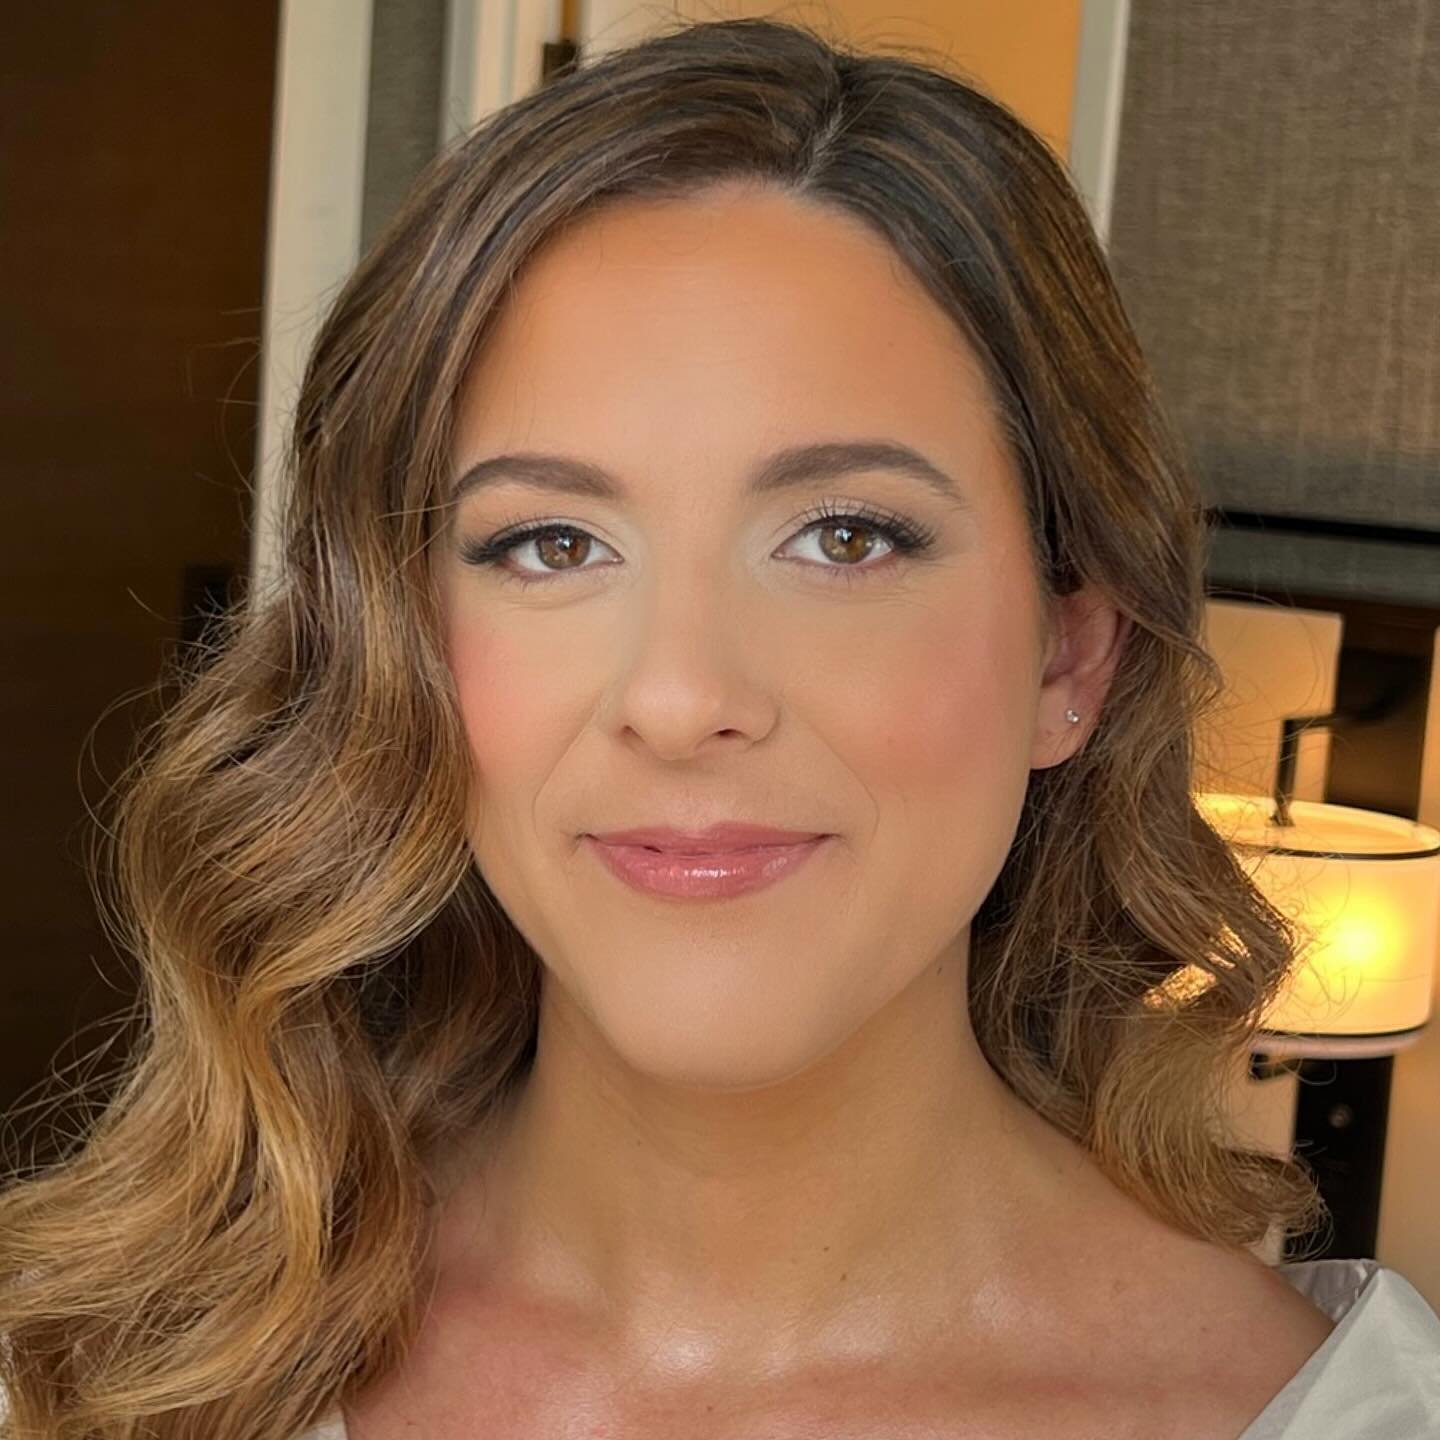 As wedding season begins, I&rsquo;ve been getting a lot of requests for more MOB &amp; MOH inspiration pictures! I hear you 🫶🏻 I loved this natural, elegant MOH look on Kimberly from Adrienne&rsquo;s wedding last year! We achieved this look with in